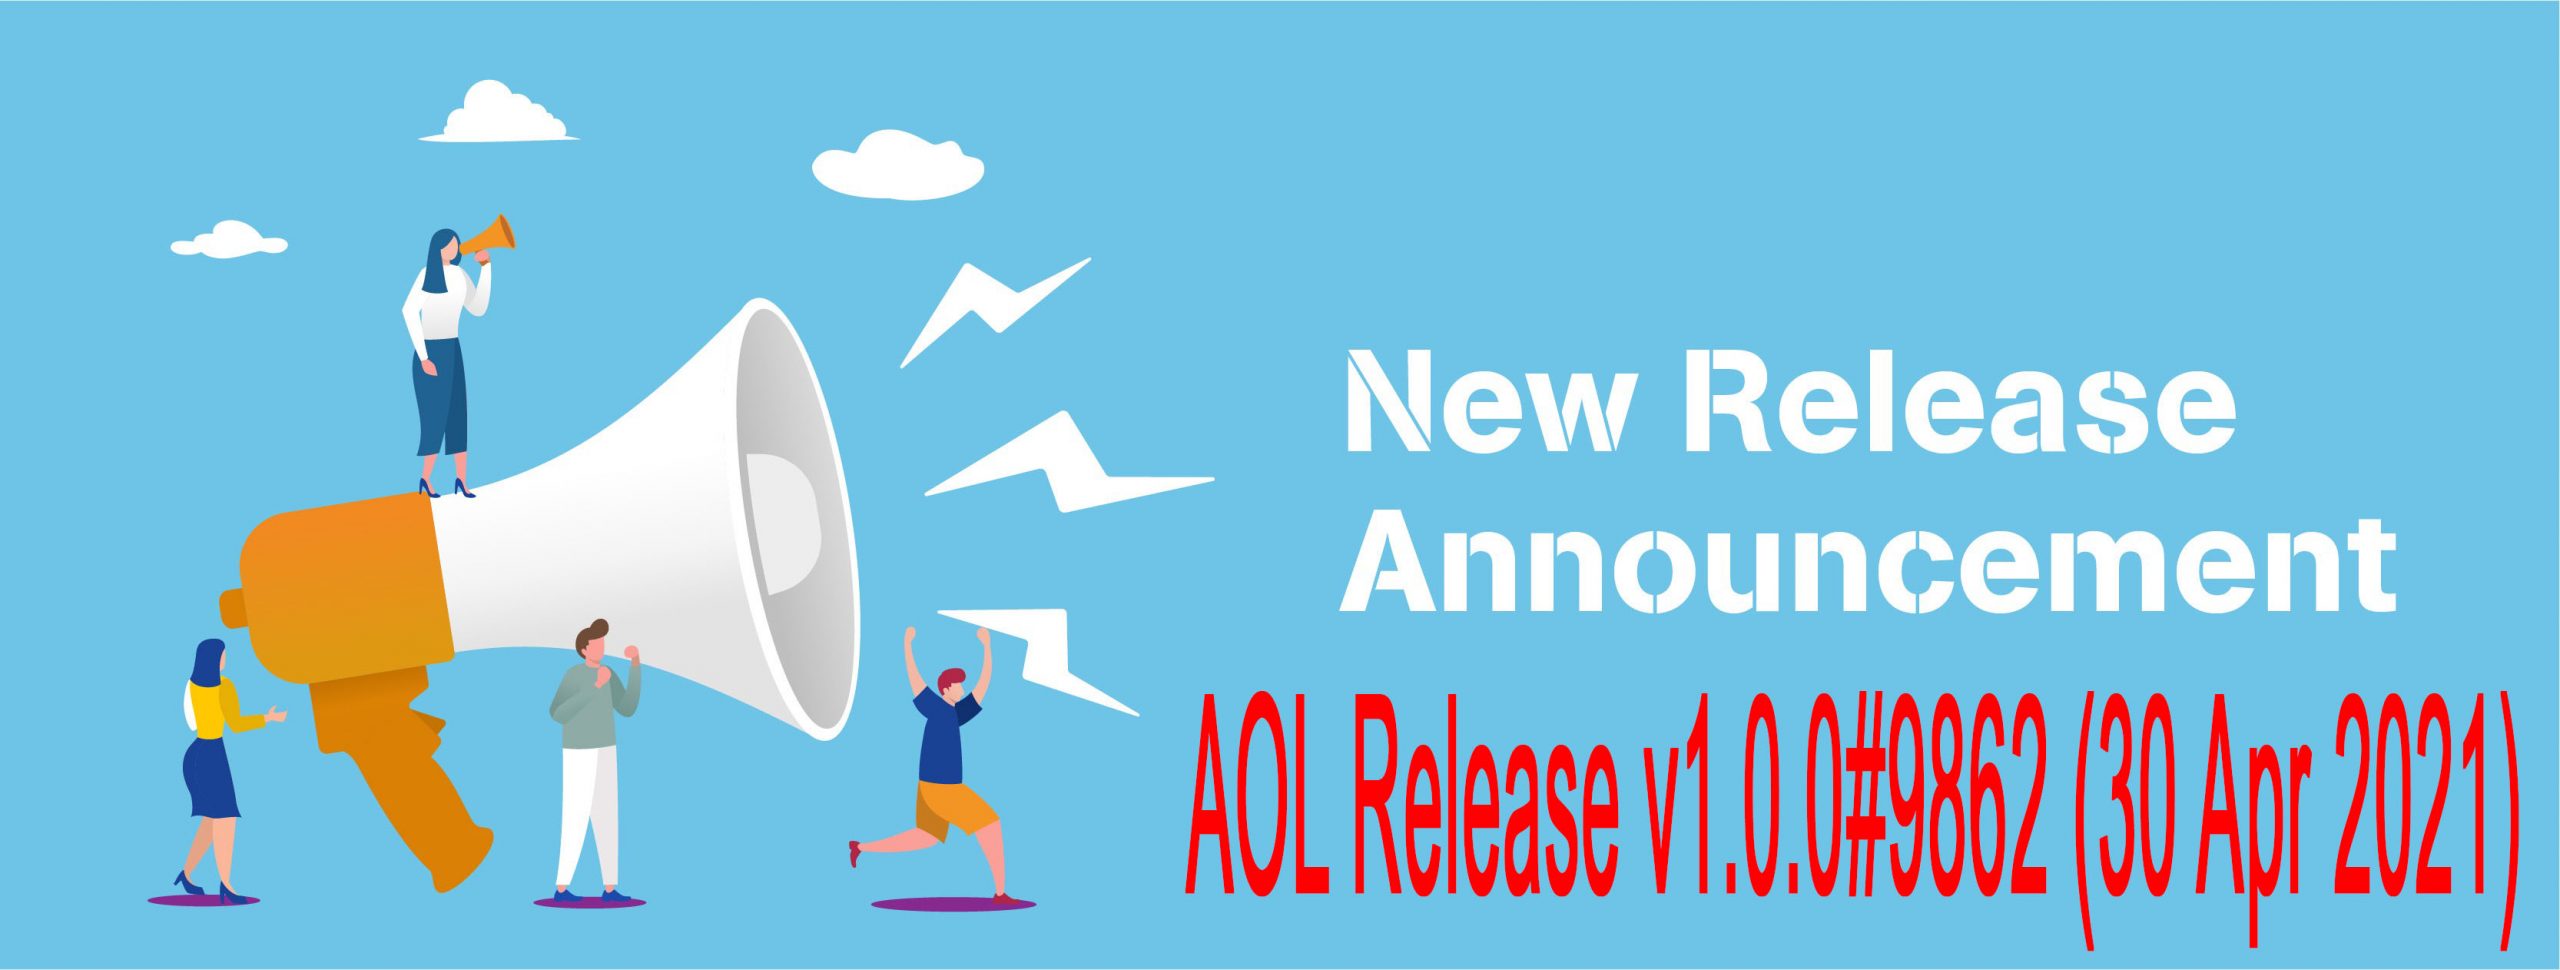 Accurate Online Release v1.0.0#9862 (30 Apr 2021)